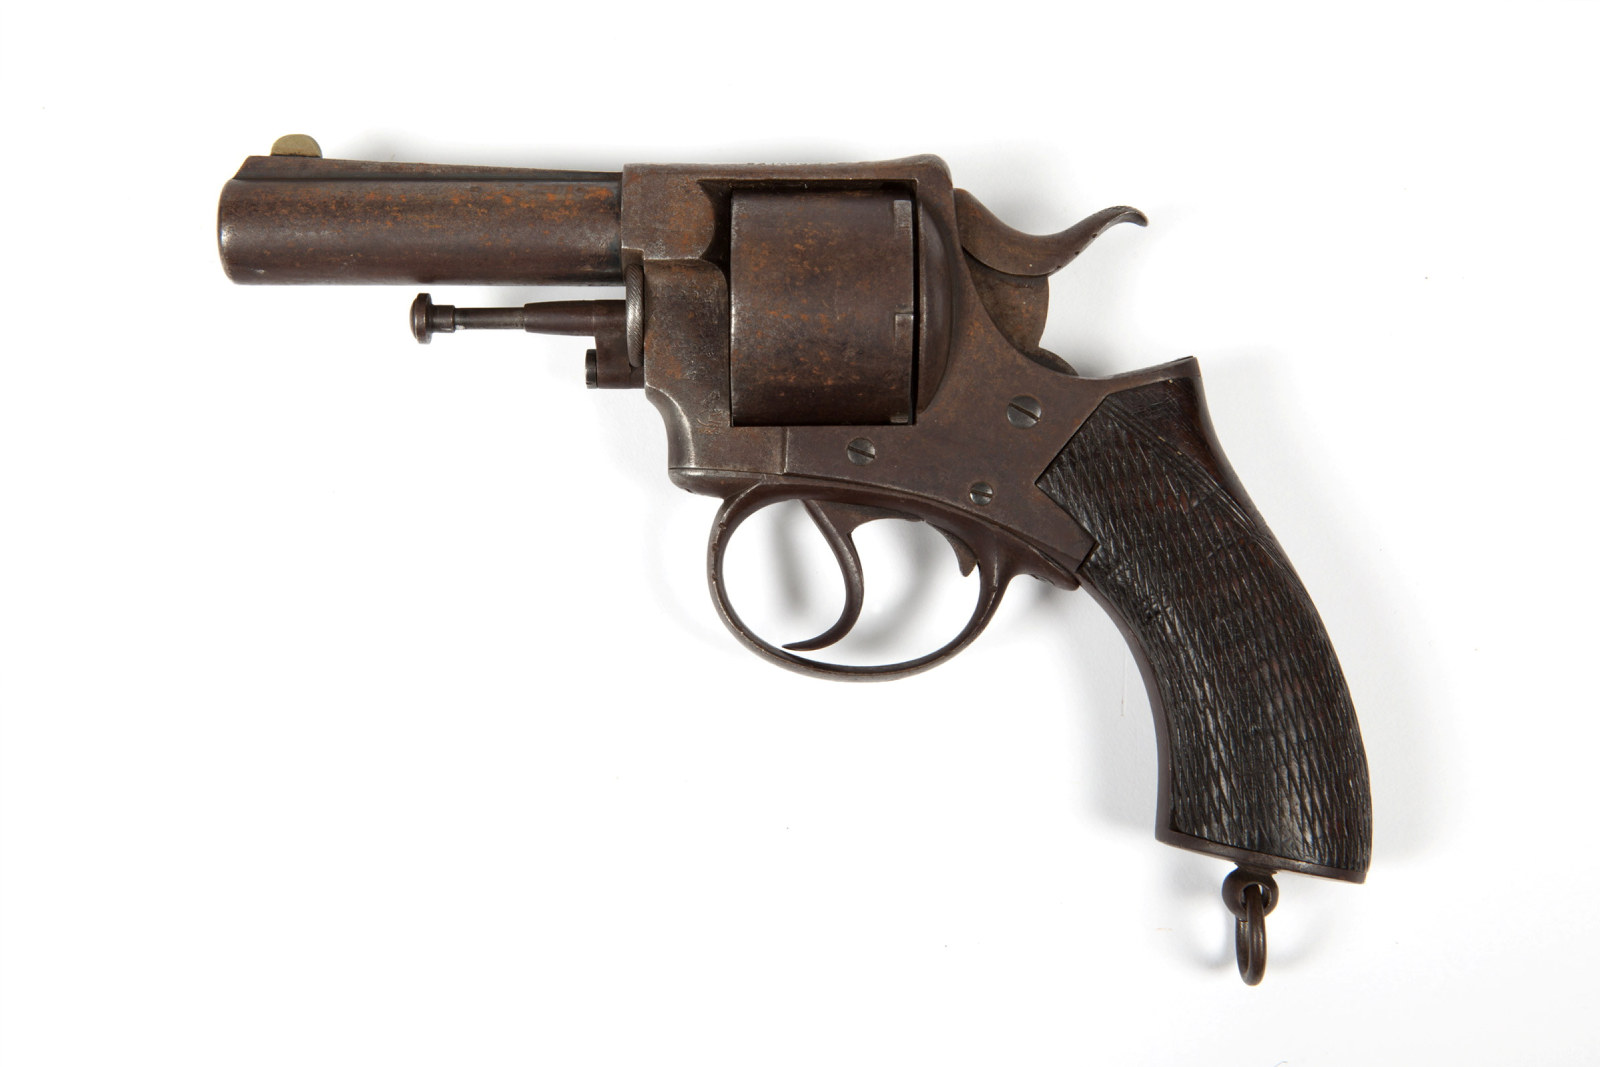 Pistol thought to belong to Ned Kelly